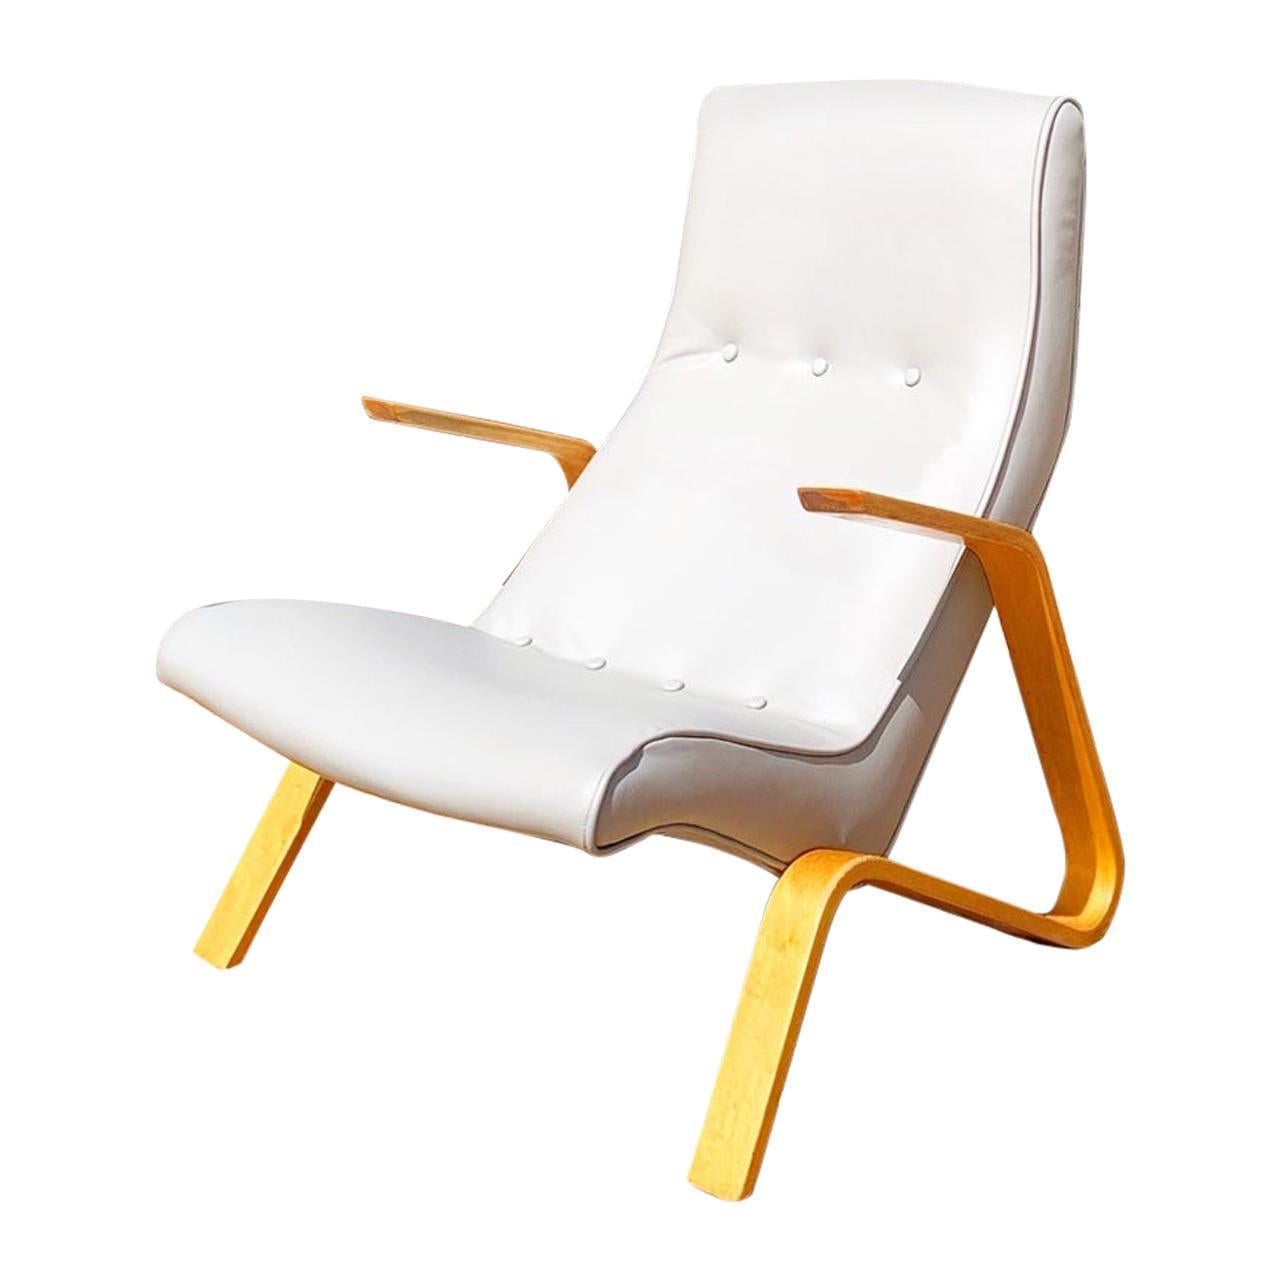 Vintage Eero Saarinen Leather Grasshopper Lounge Chair by Knoll For Sale